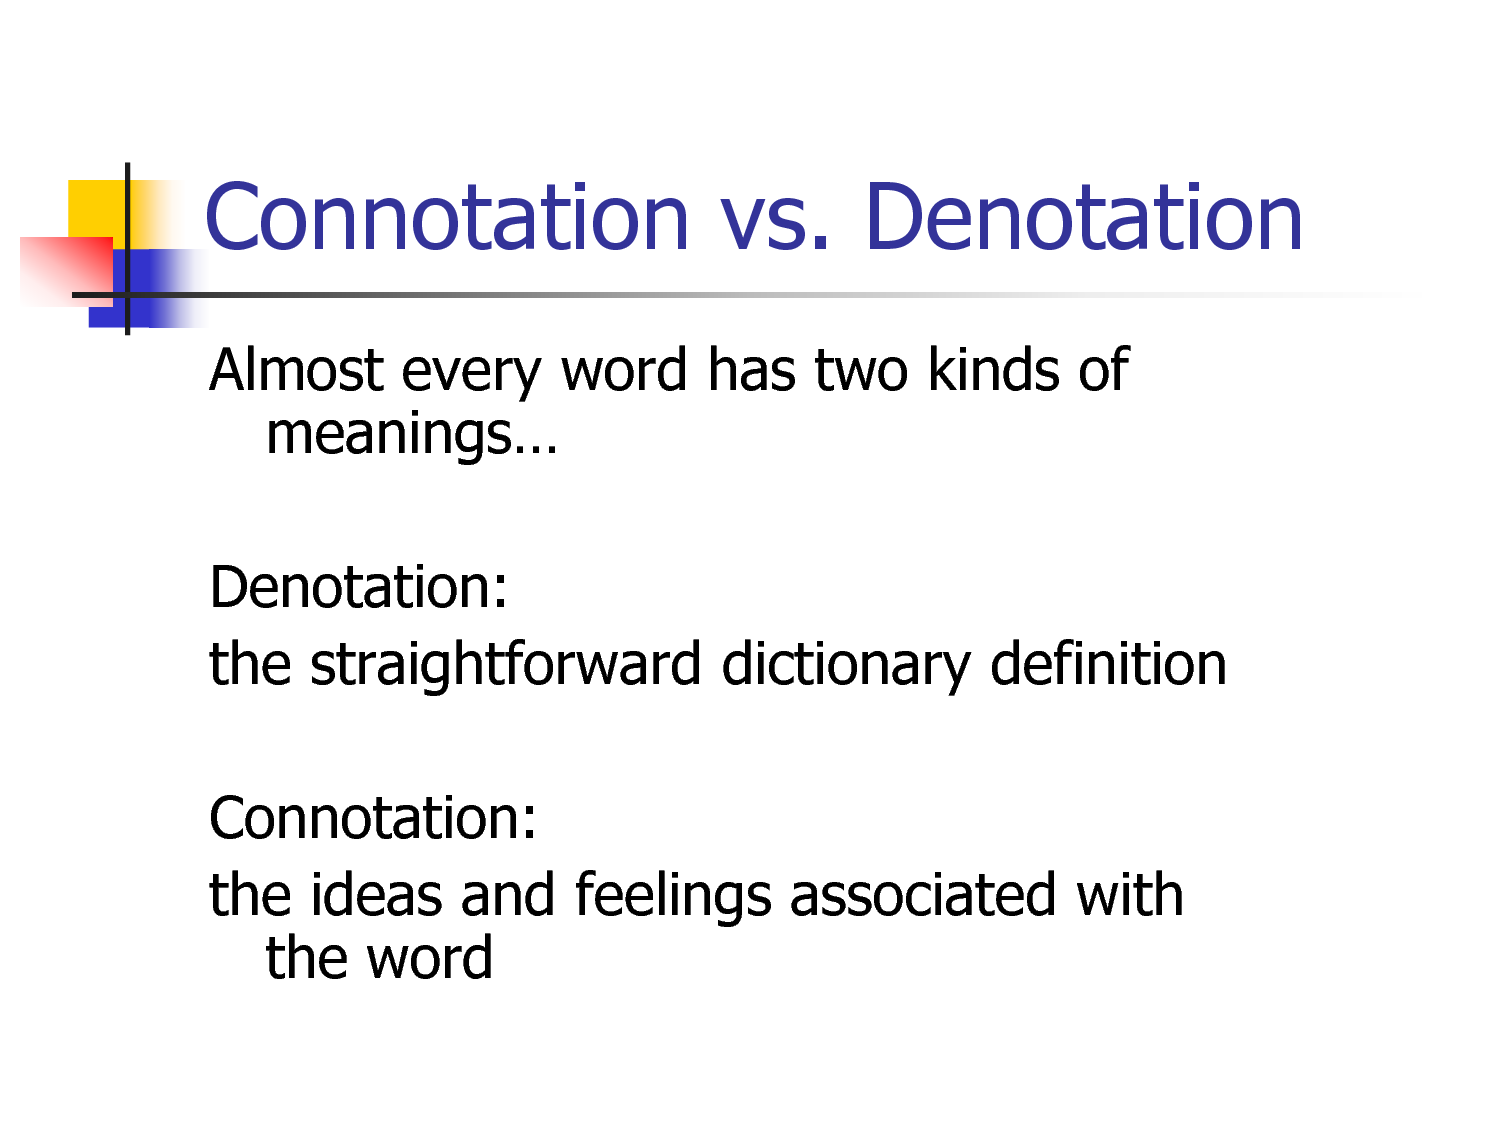 Denotative and connotative meanings